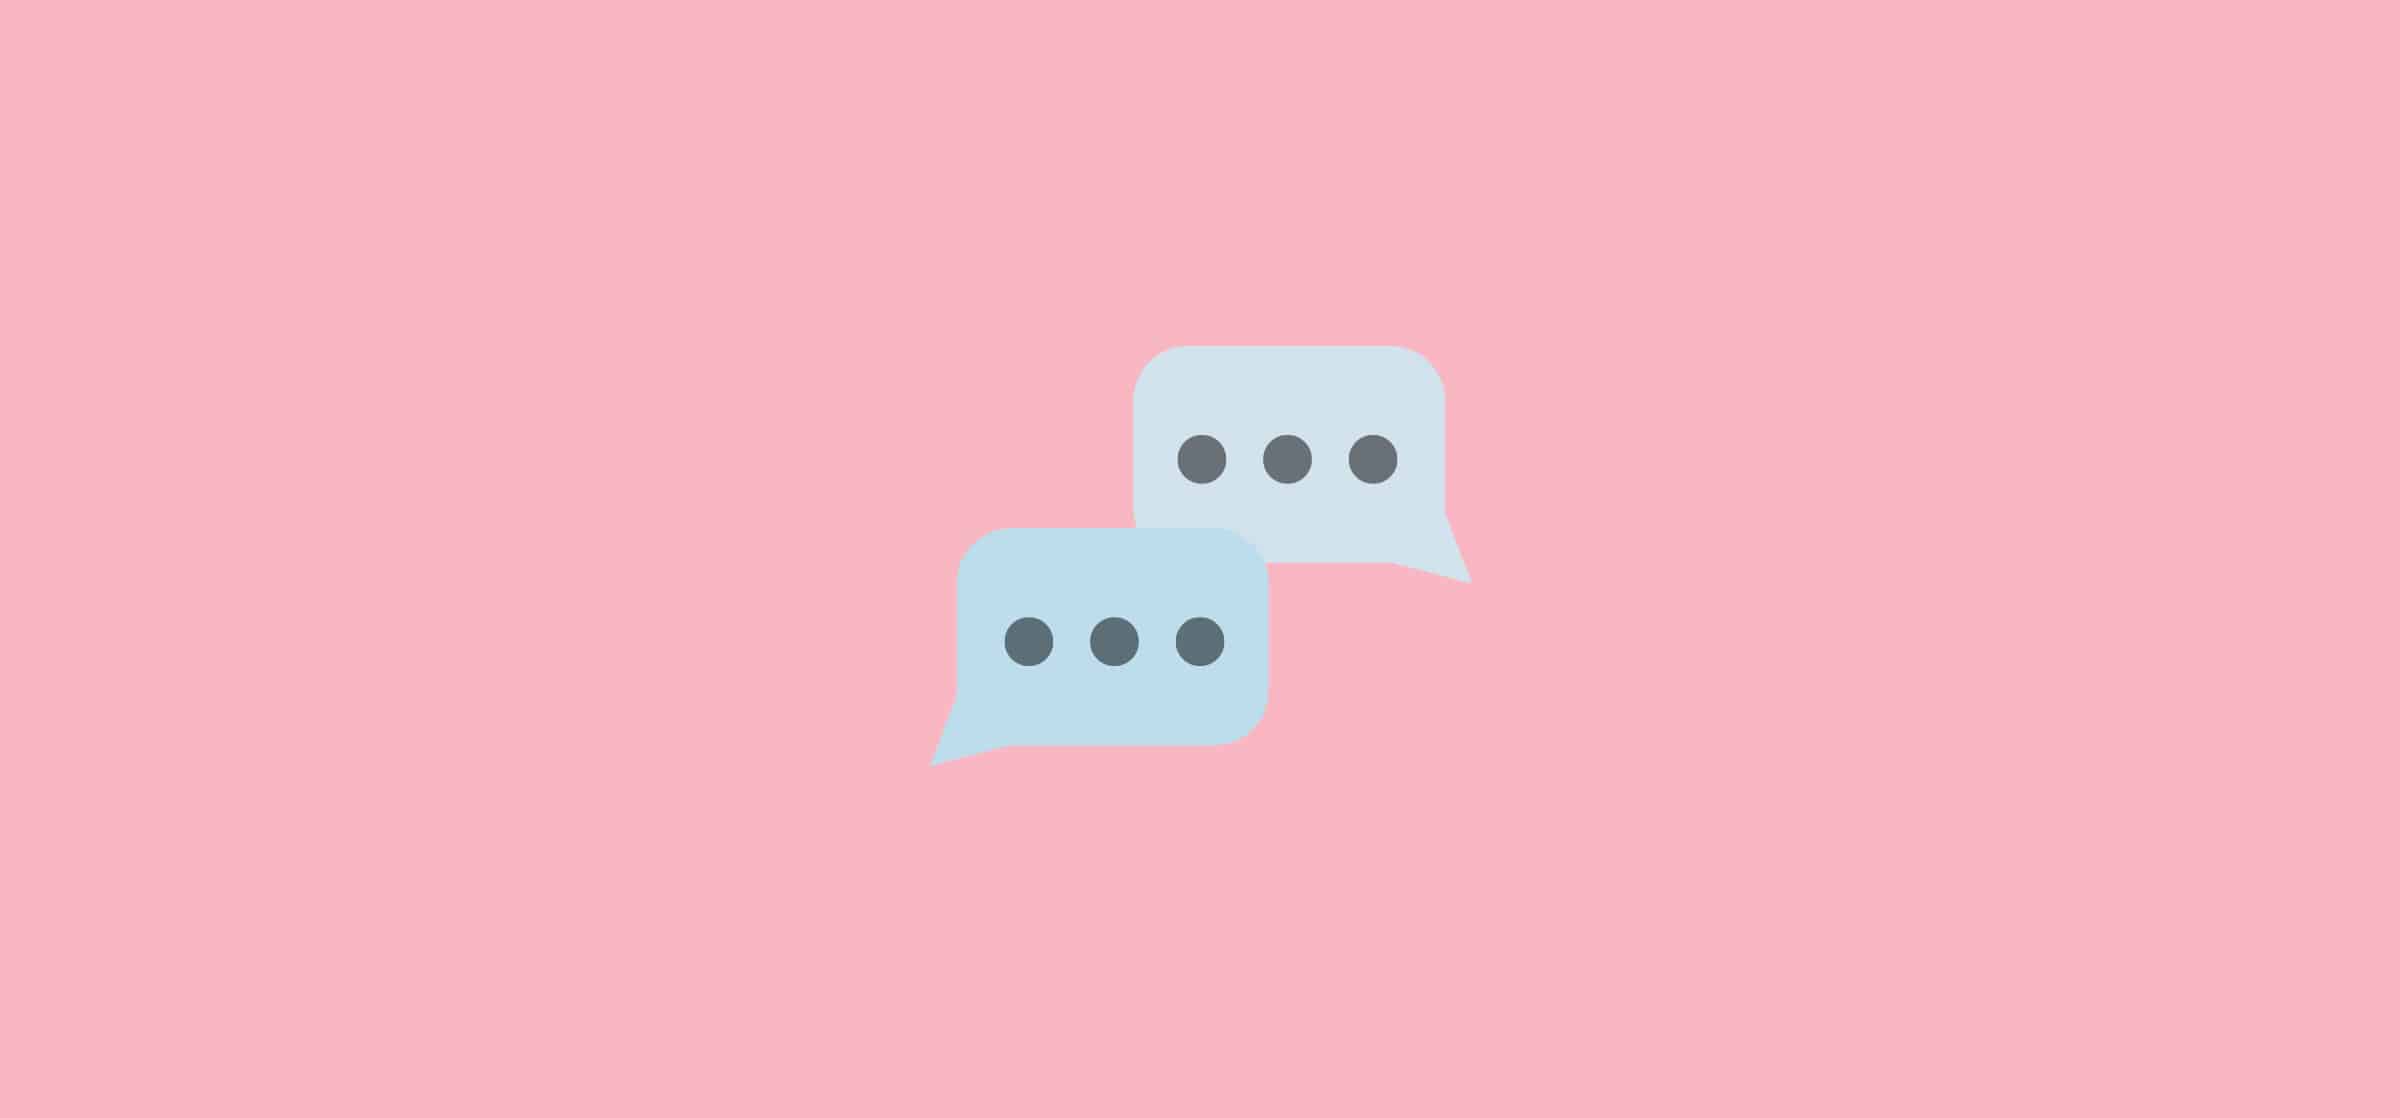 A pair of chat bubbles, representing an interview on product manager jobs